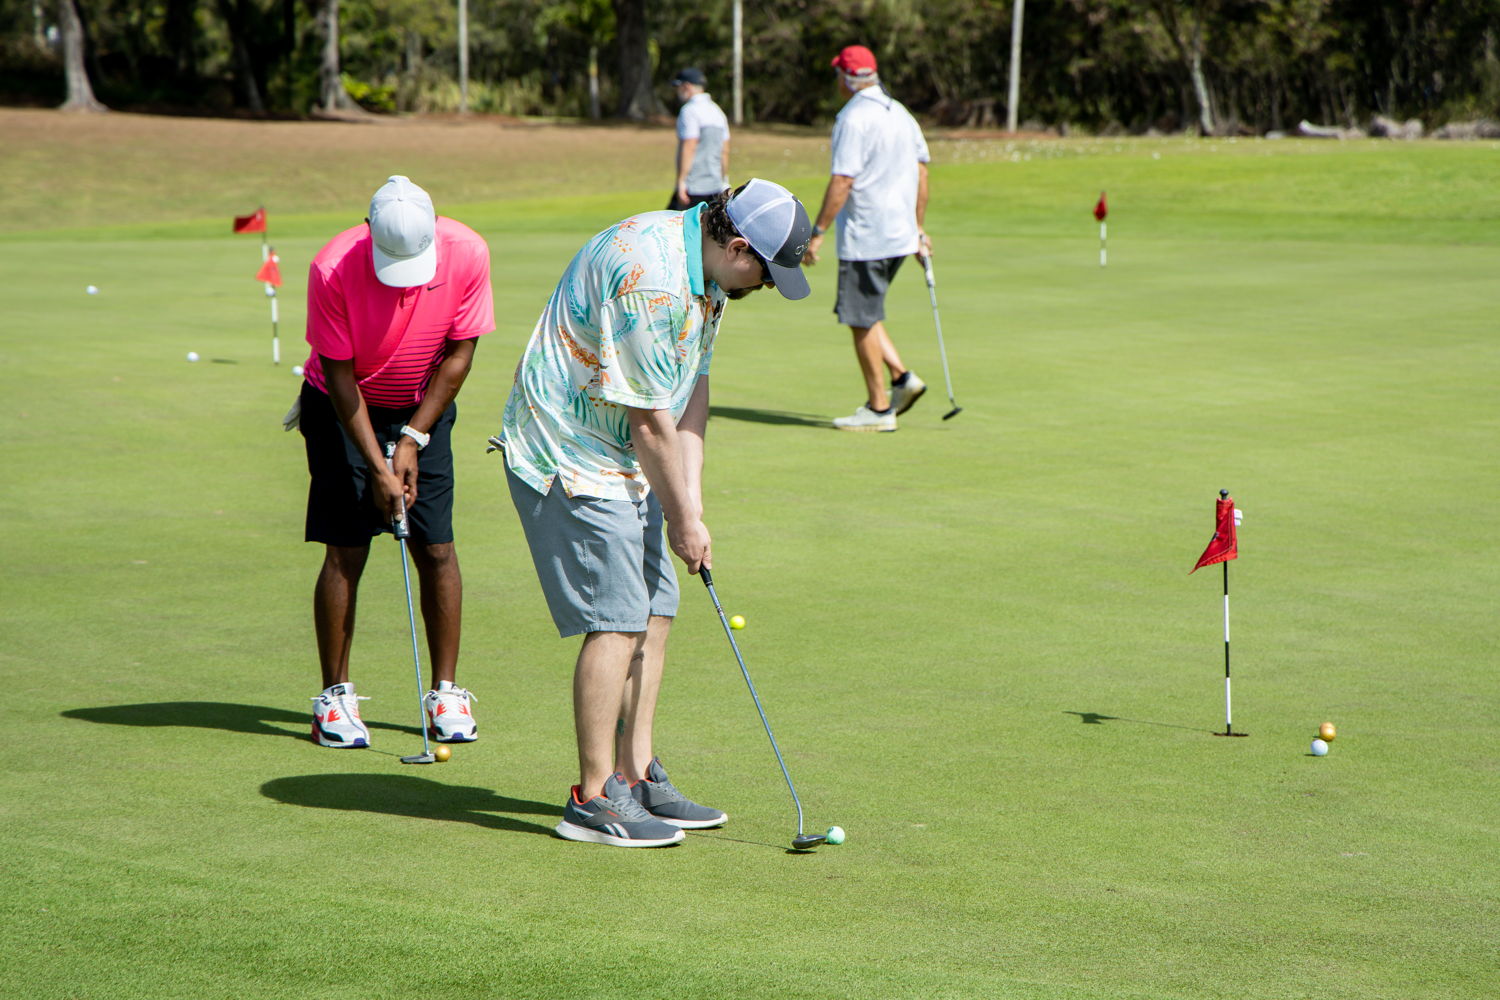 Golfers warm up on the putting green.